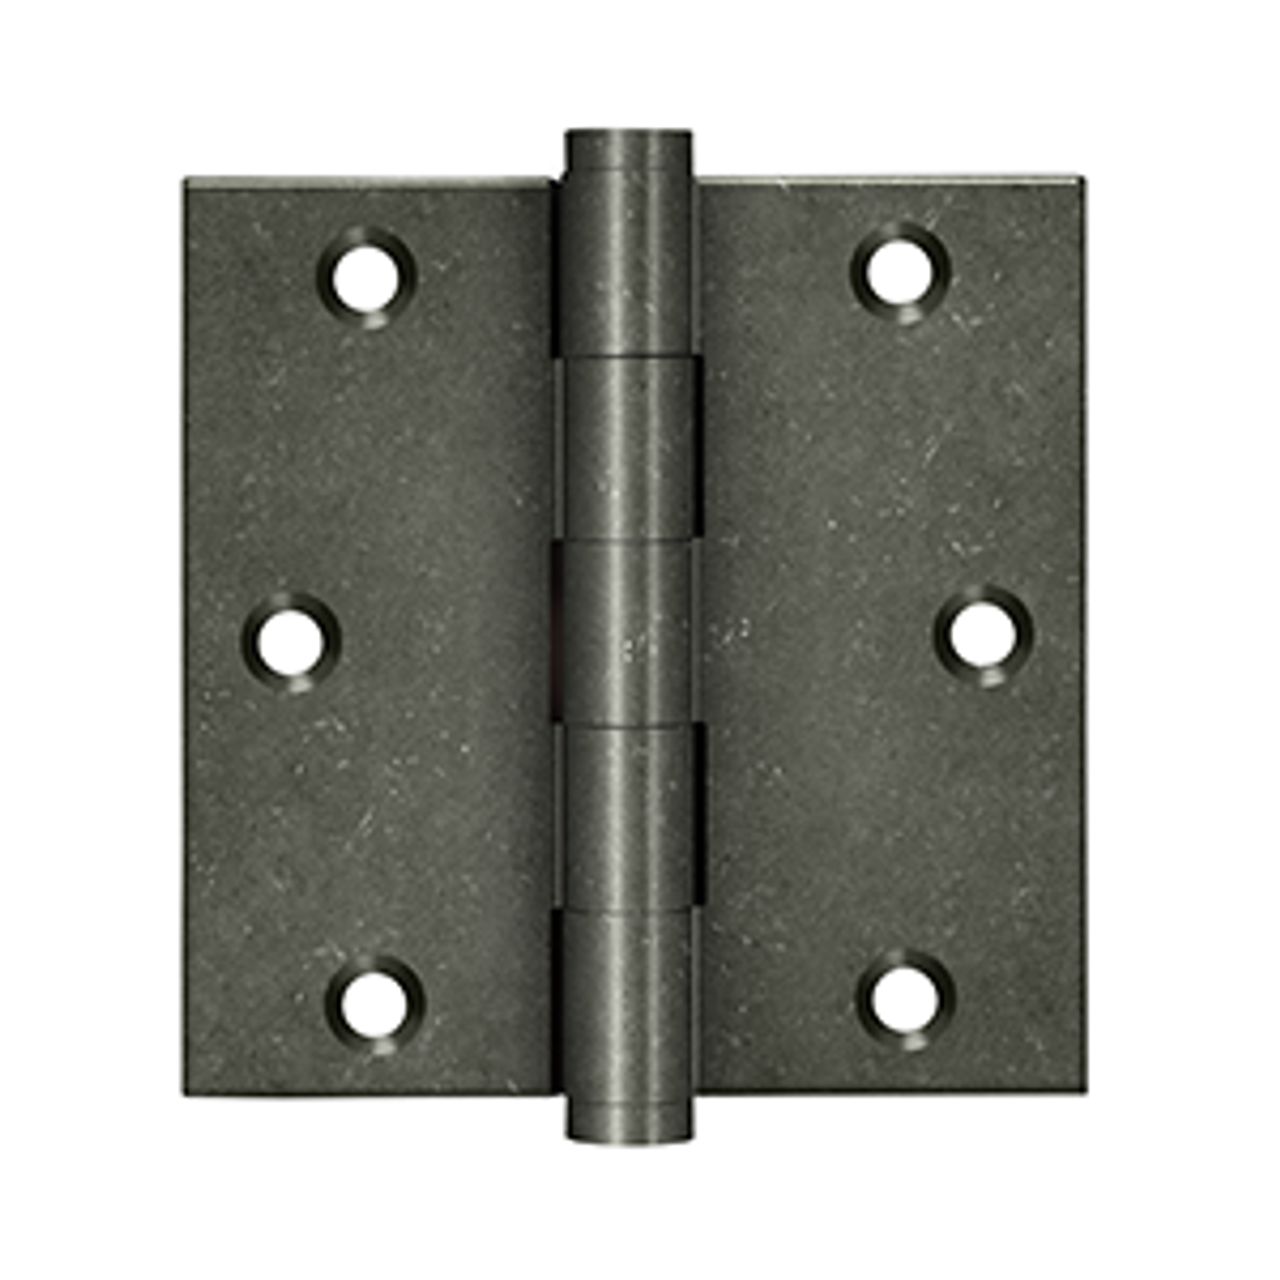 DELTANA DSB35 3-1/2" X 3-1/2" SQUARE CORNER SOLID BRASS HINGES DISTRESSED FINISHES